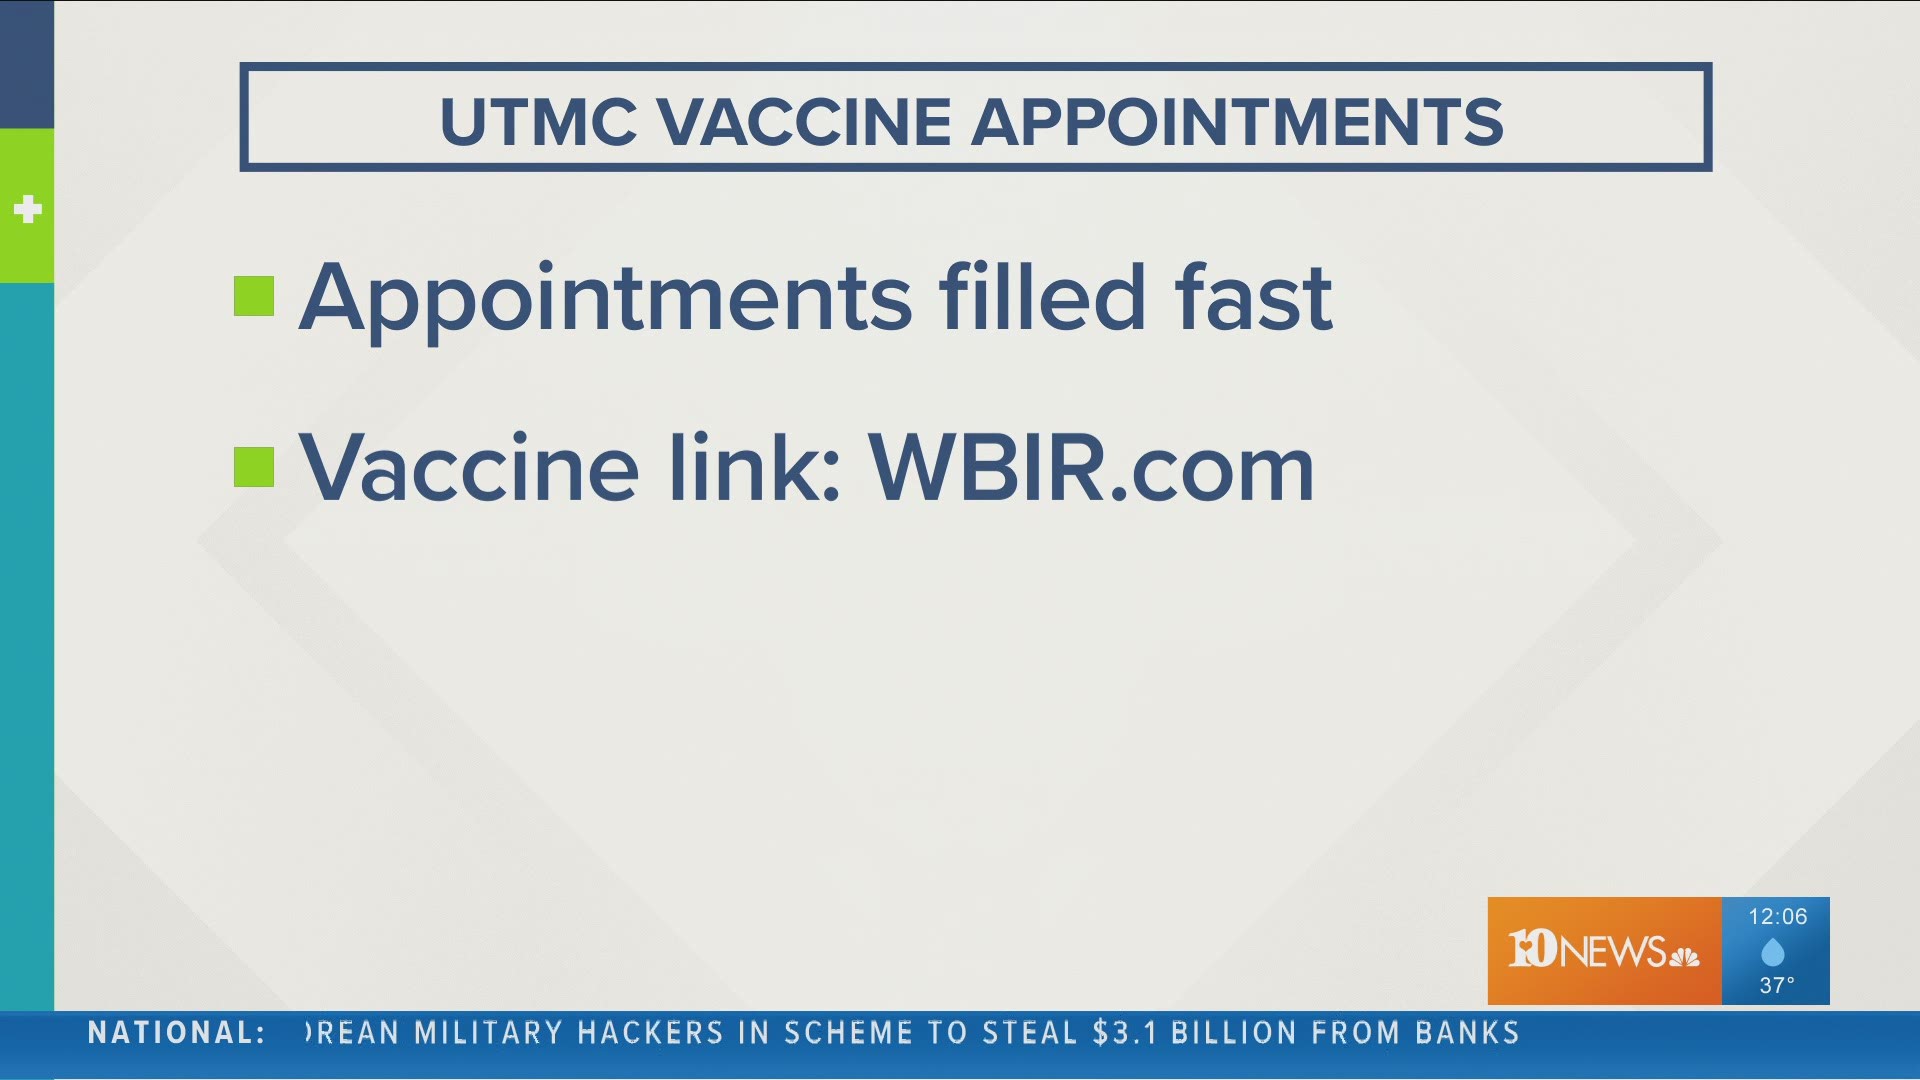 Officials said that the University of Tennessee Medical Center's goal was to vaccinate as many people as quickly and efficiently as they can.